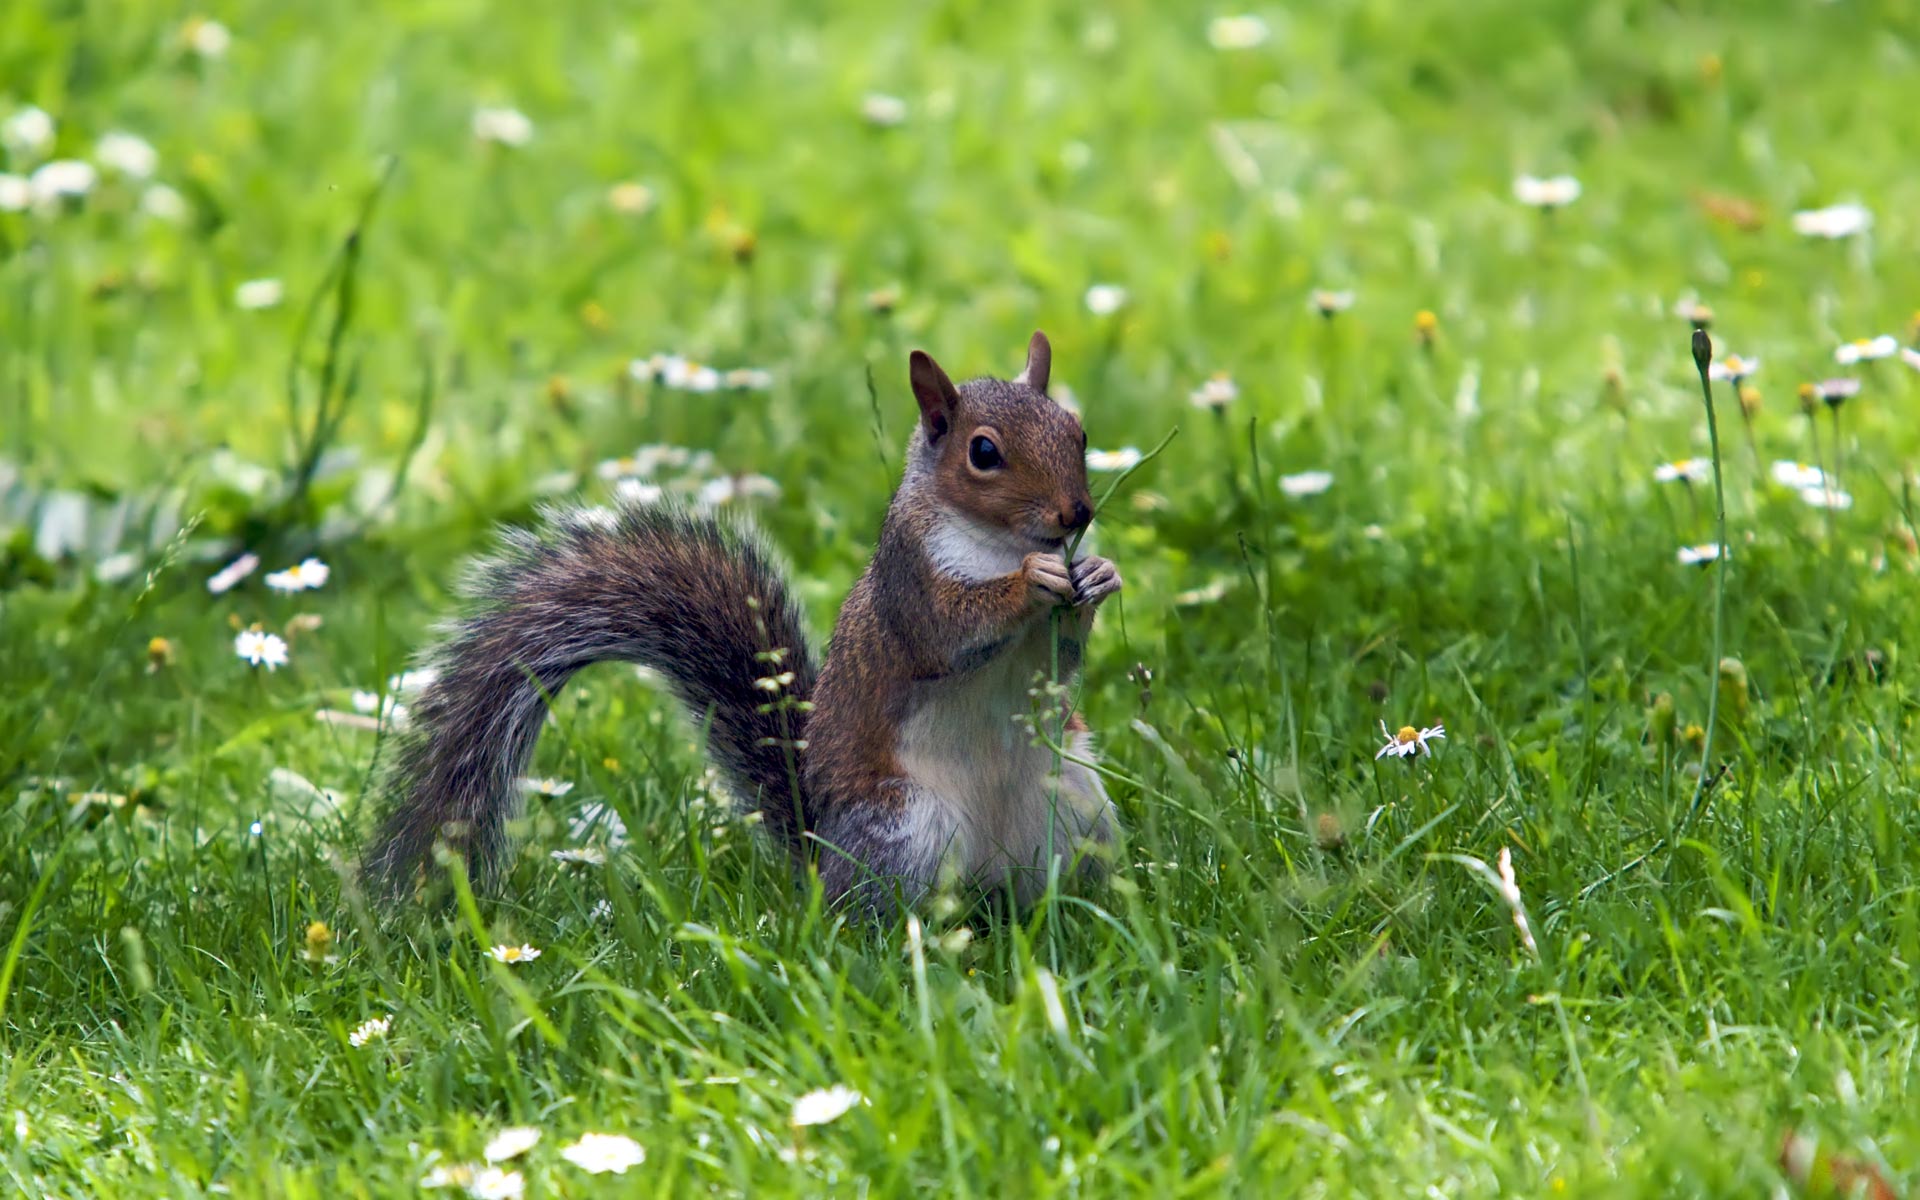  background funny squirrel backgrounds fun grass eating wallpapersjpg